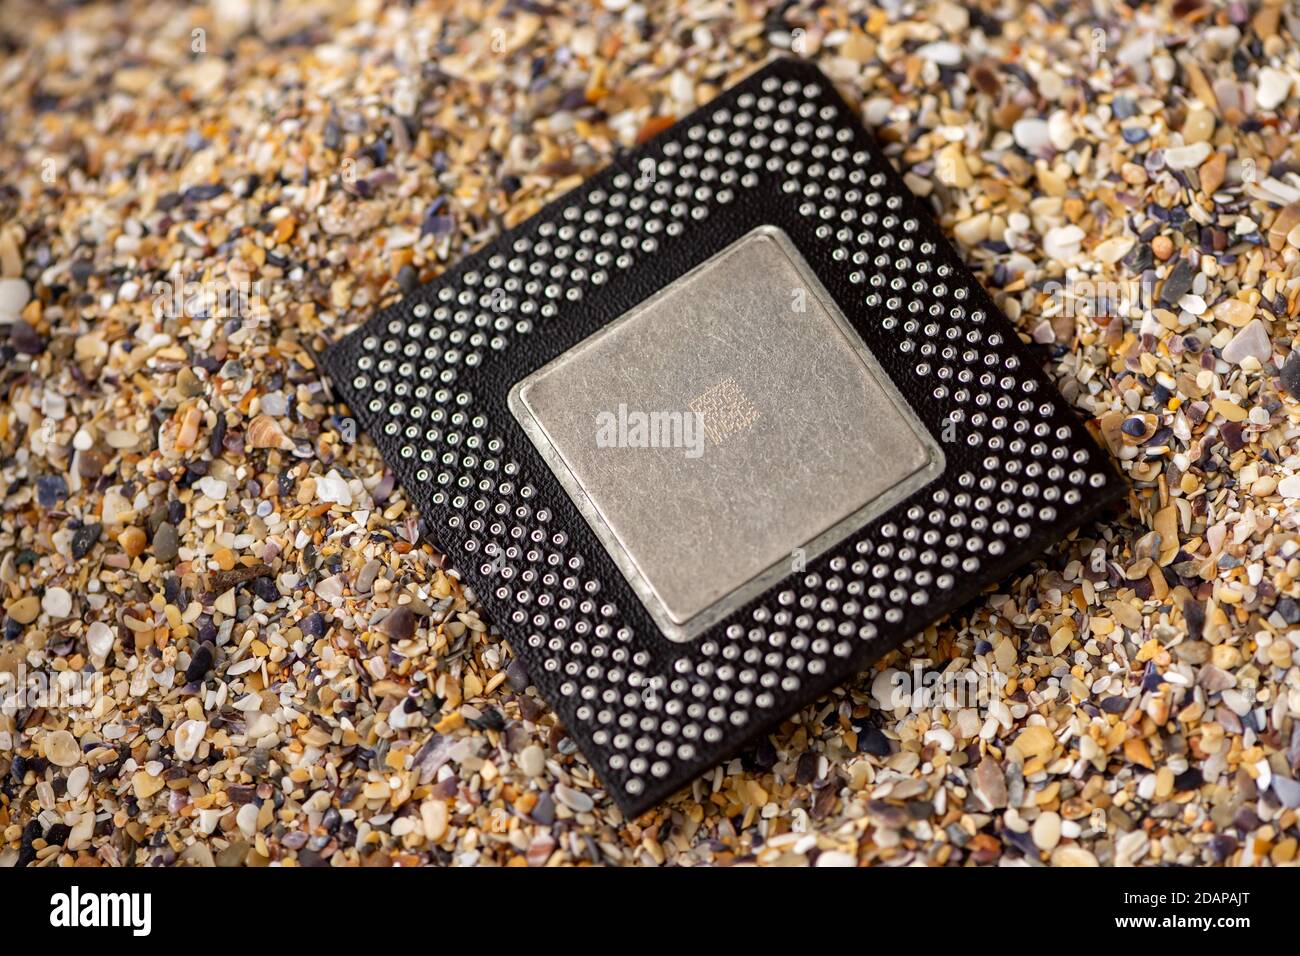 Timisoara, Romania - October 17, 2020: Close-up of an Intel Celeron  FV80524RX366128 processor, 366 Mhz, socket 370 with sand in the background  Stock Photo - Alamy